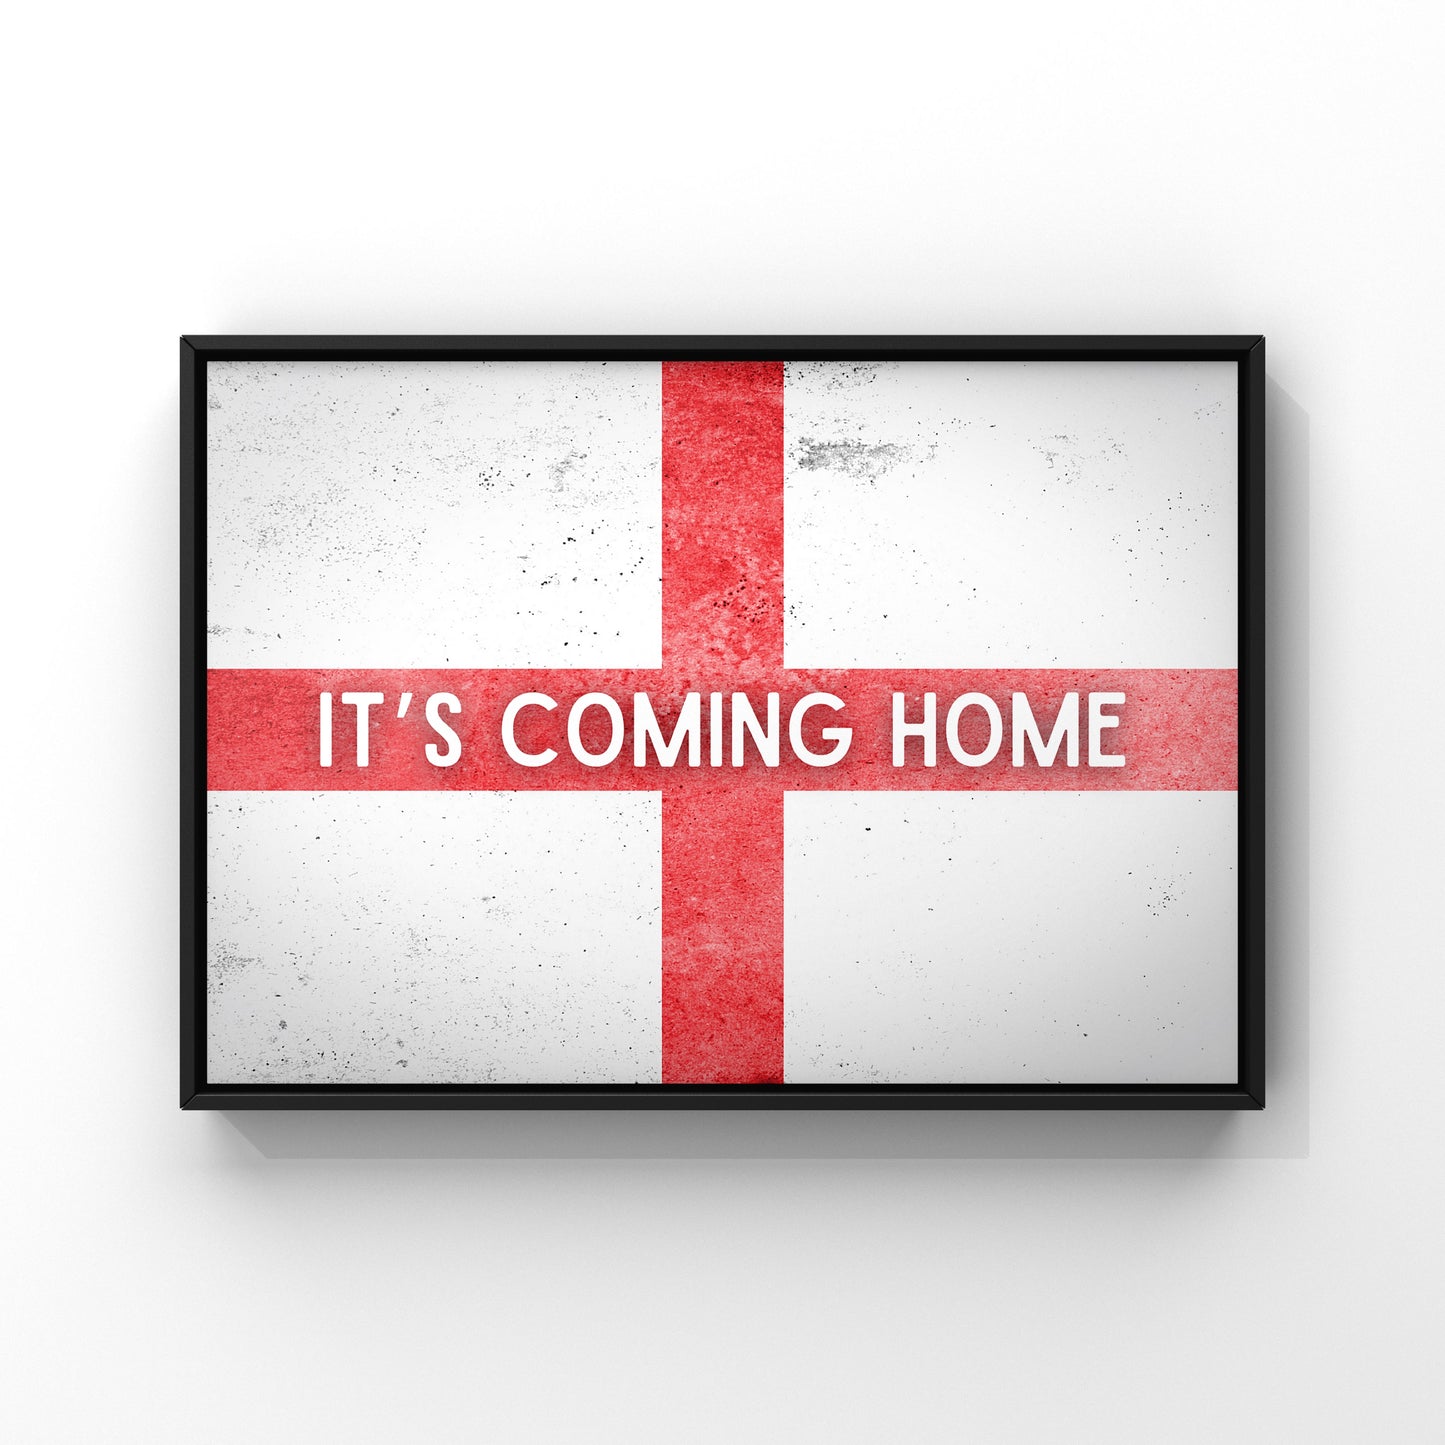 It’s coming home